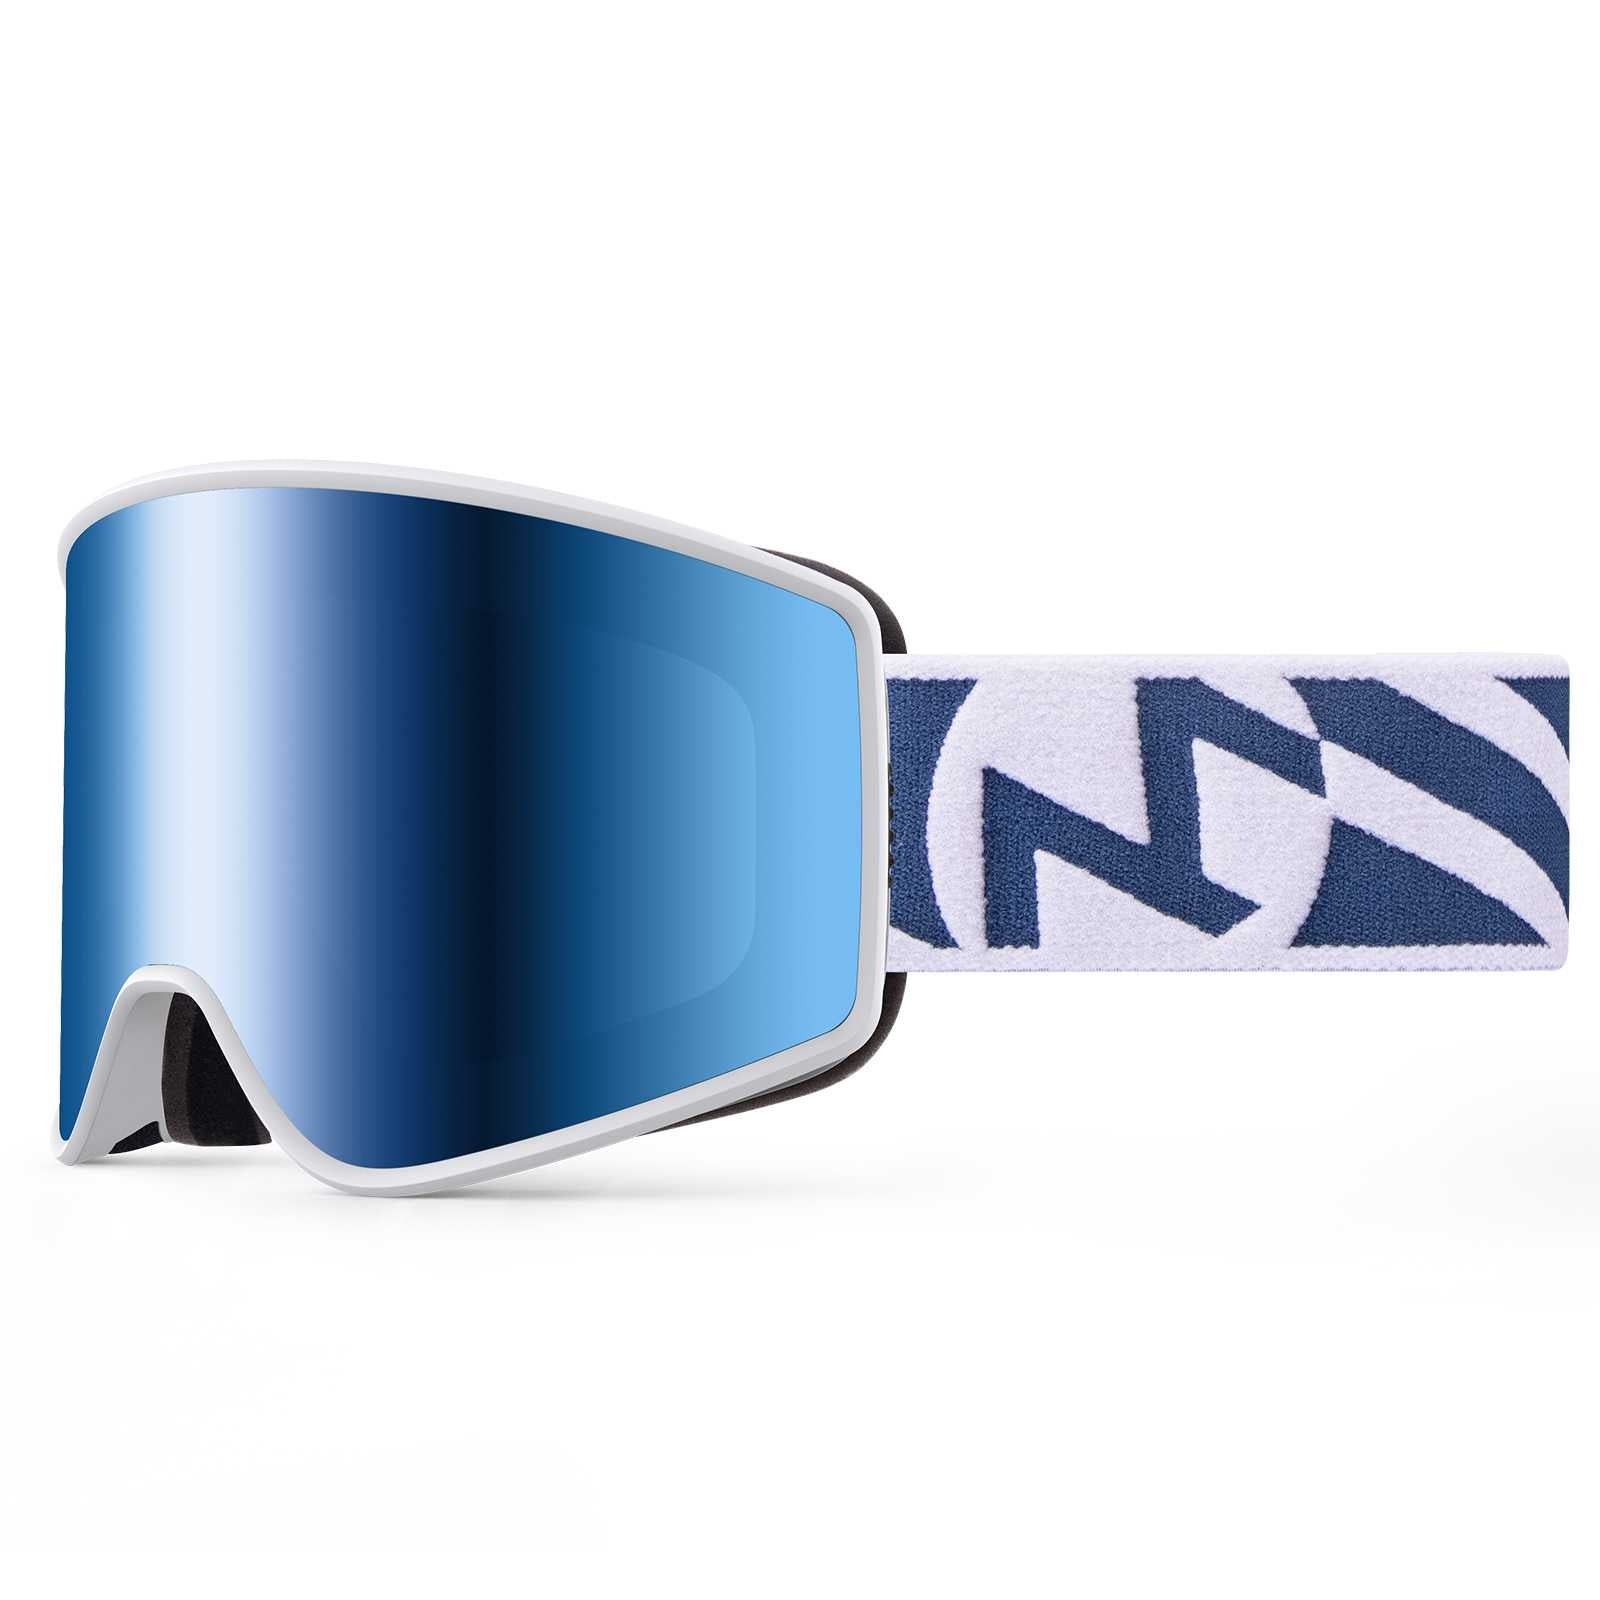 cylindrical snow goggles